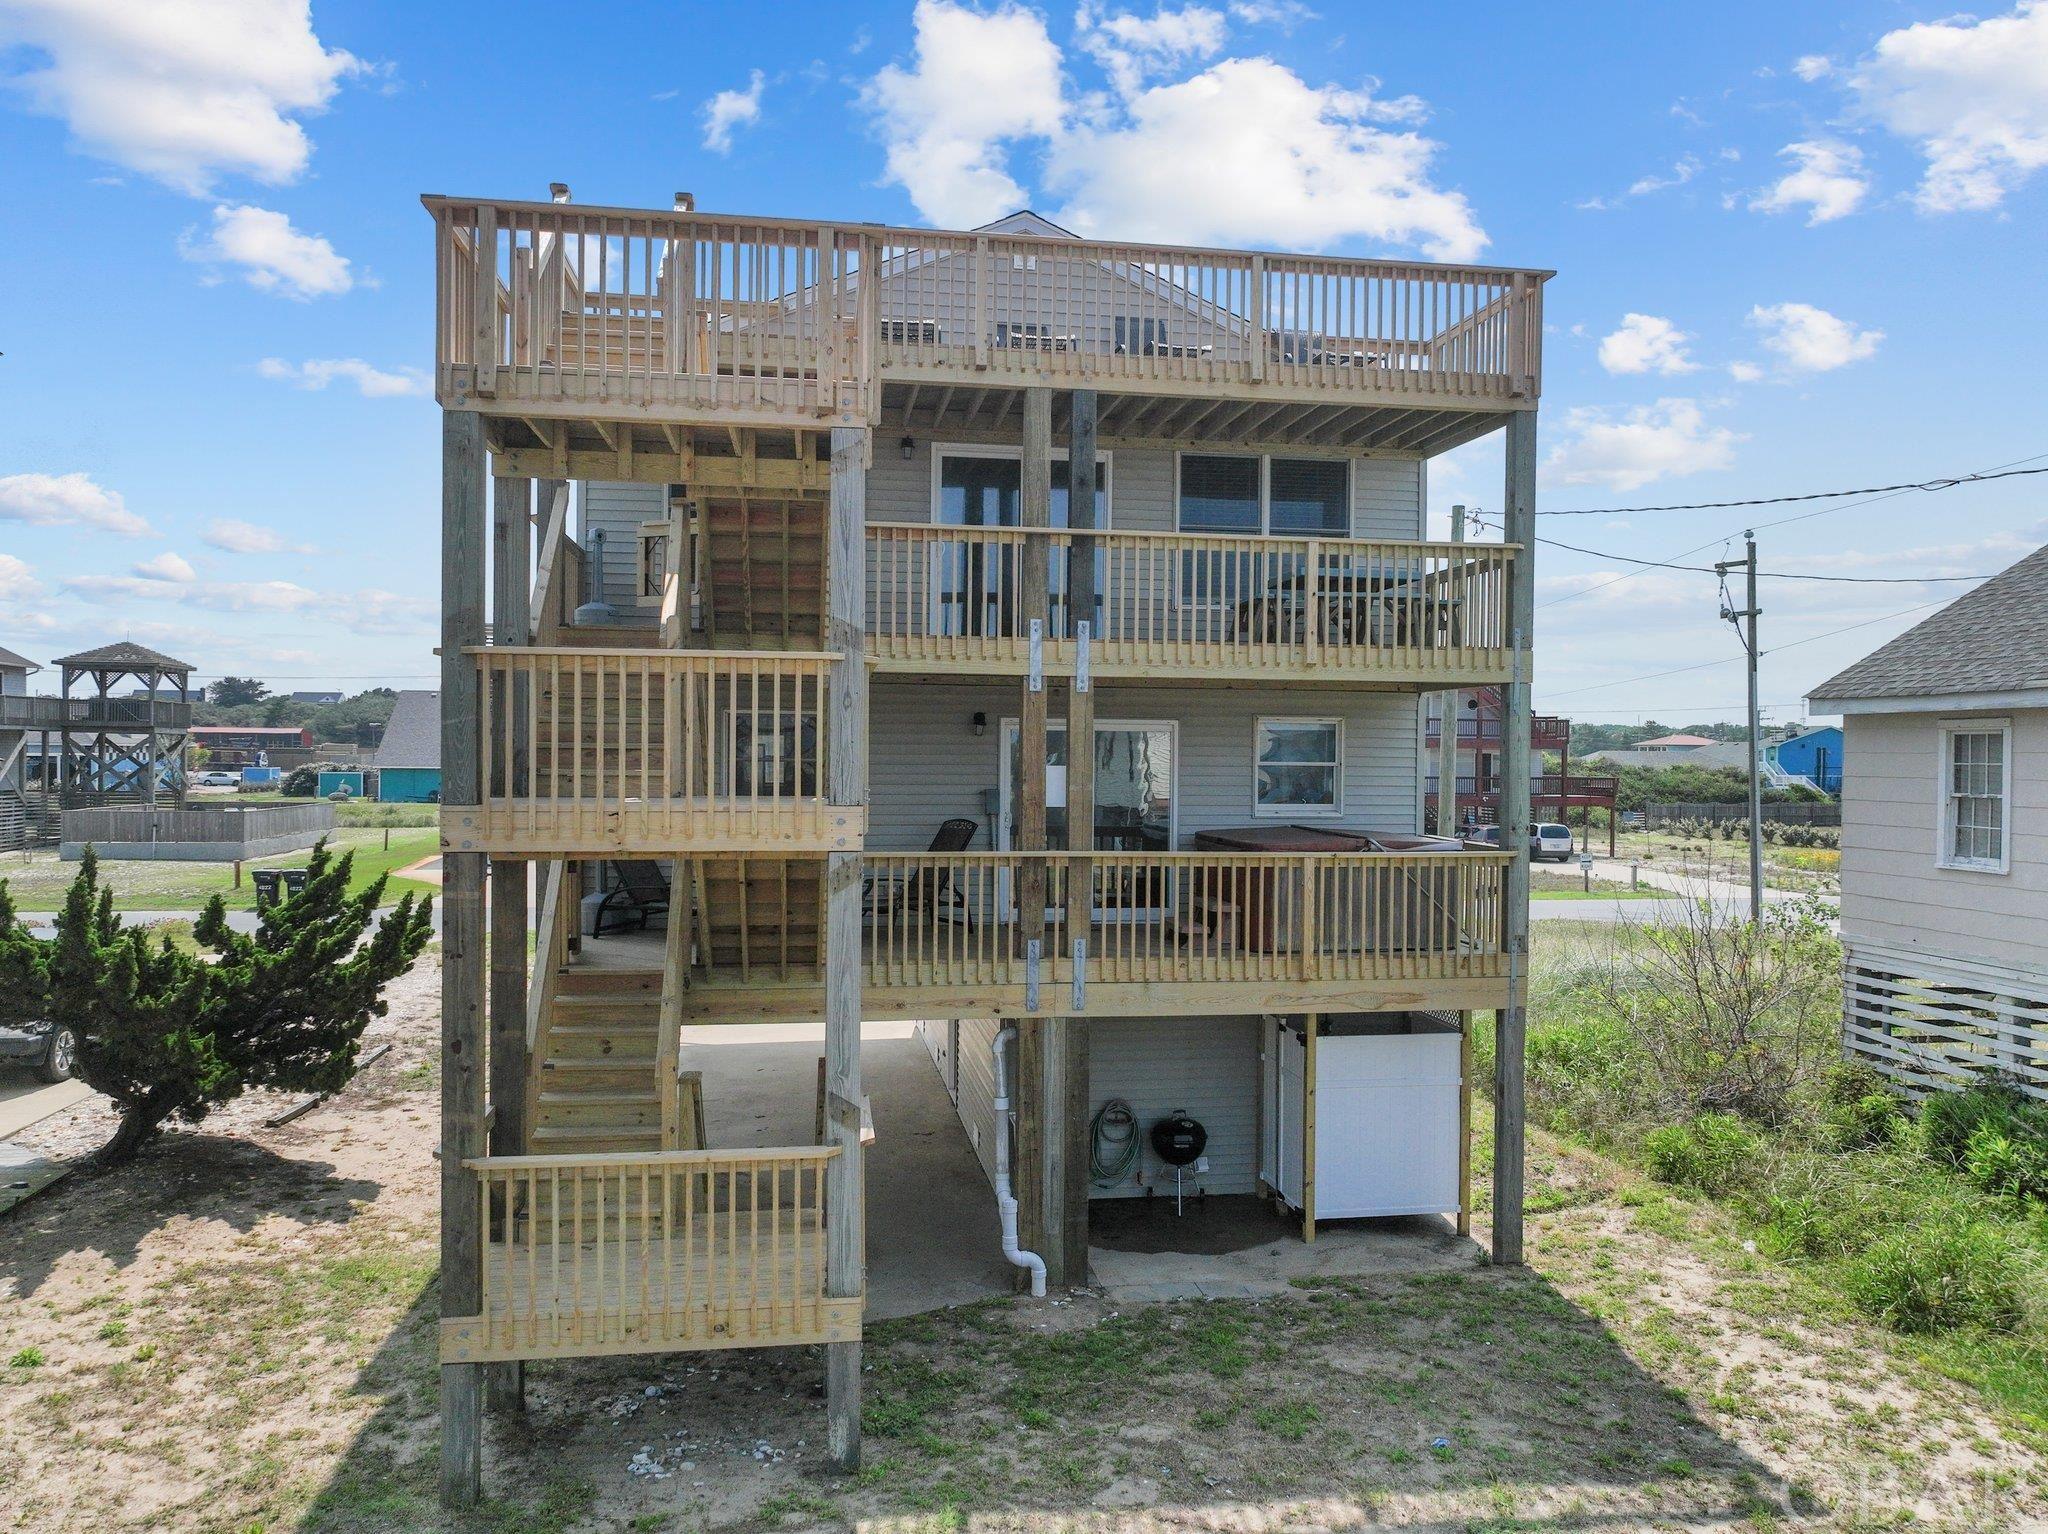 2 LOTS OFF THE OCEAN WITH OCEAN VIEWS IN KITTY HAWK! YOU WILL BE WOWED BY HOW CLOSE THIS ONE IS TO THE STARFISH BEACH ACCESS!  This home is Close to Shopping, & Restaurants. This 4 Bedroom 3 Bath OBX Beach Cottage is perfect for Vacation Rentals, Second or Primary Home. Watch the Sunrise over the ocean while sitting in your living room, on the large deck or venture up to the expansive Ships Watch deck with your morning coffee.  Enter this home from the ground floor dry entry into the game room.  The Mid-Level features all LVP flooring, a nice size media/sitting room with sliding doors out to the covered deck with access to all decks and a Hot Tub . This level also has 3 bedrooms & 2 full baths.  Top level has an open Great room/dining/kitchen combination, LVP flooring. throughout, Granite Countertops.  Custom cabinets & All Stainless appliances, covered decks for those hot days and plenty of sundecks with access to all levels. Ground Floor Storage & Outdoor Shower.   Great neighborhood for walking & bike riding! Kitchen and appliances are about 3 years old, Flooring is 3 years old. Fortified roof is 4 years old. HVAC systems are 6 years old-serviced by One Hour heating and air 2 times per year.  Next schedule date is 8/8. All light fixtures are new.